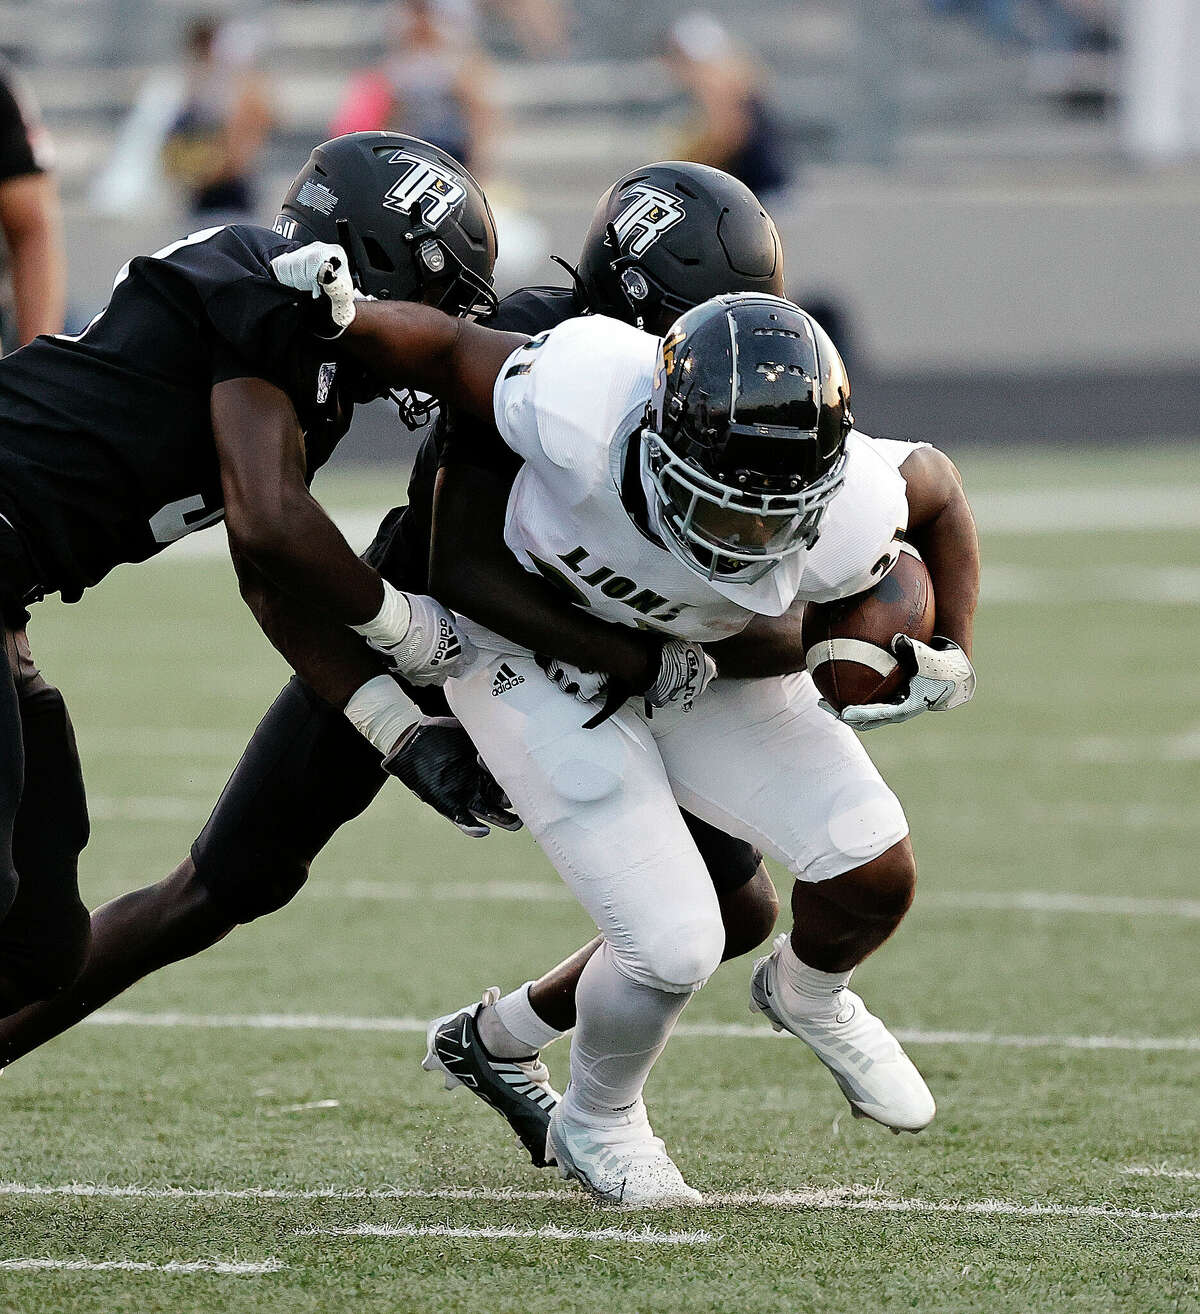 ROSENBERG, TX - SEPTEMBER 22: Lake Creek Lions running back Ty Byars (21) runs with the ball during a high school football, District 10-5A Division II game between the Randle Lions and the Lake Creek Lions on September 22, 2022 at Traylor Stadium in Rosenberg, Texas. (Photo by Bob Levey/Contributor)